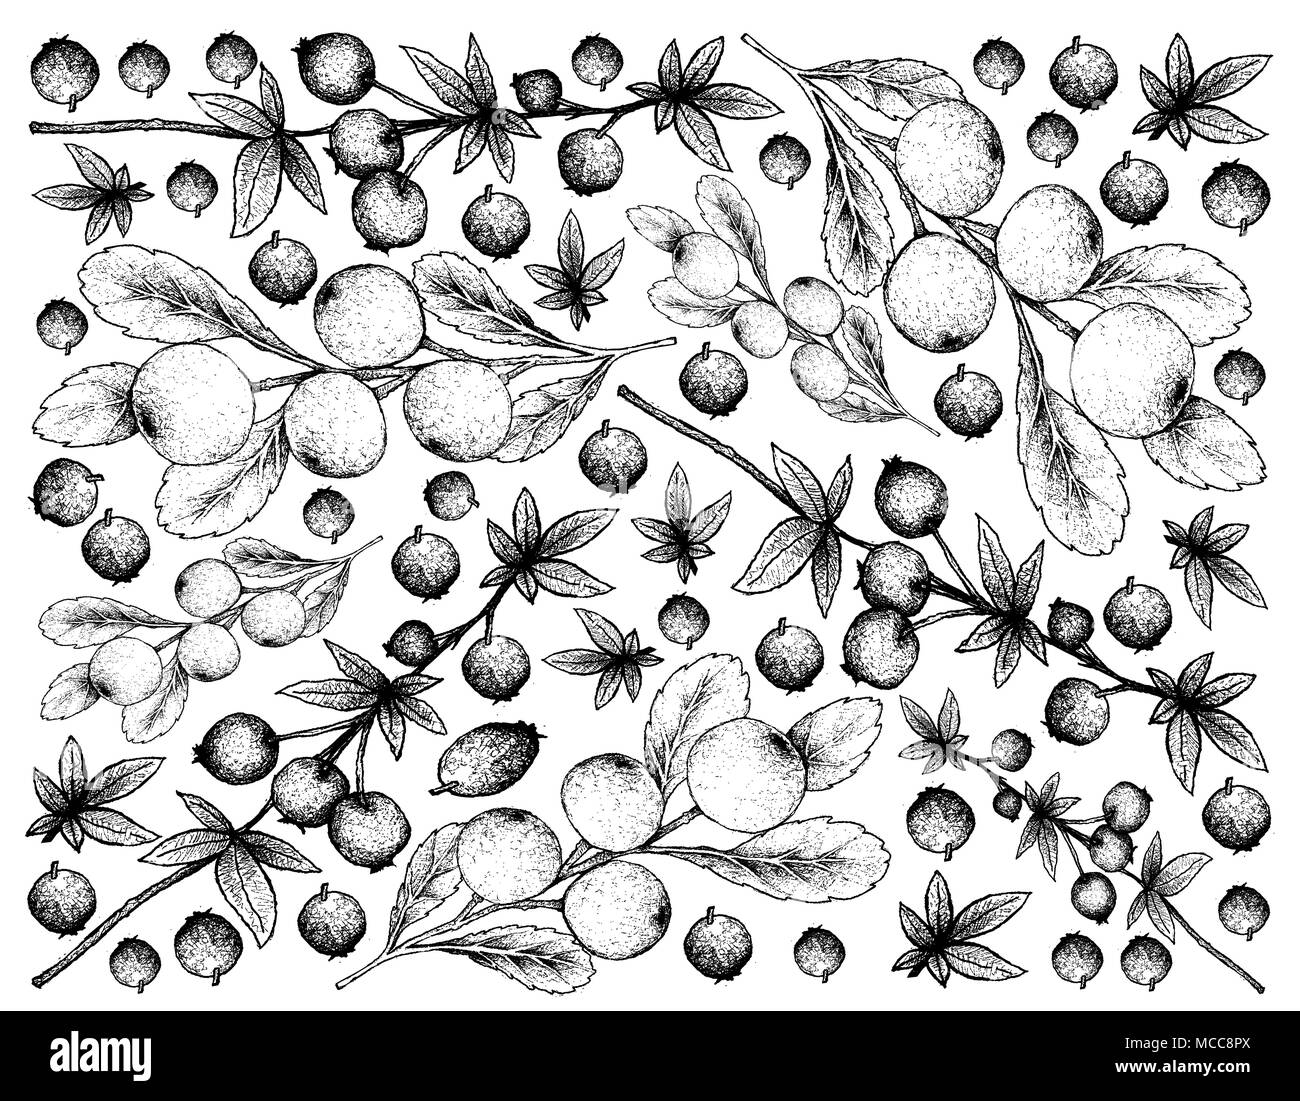 Berry Fruit, Illustration Wallpaper Background of Hand Drawn Sketch of Fresh Calafate Berry or Berberis Microphylla and Cerasus Tianschanica Fruits. Stock Photo